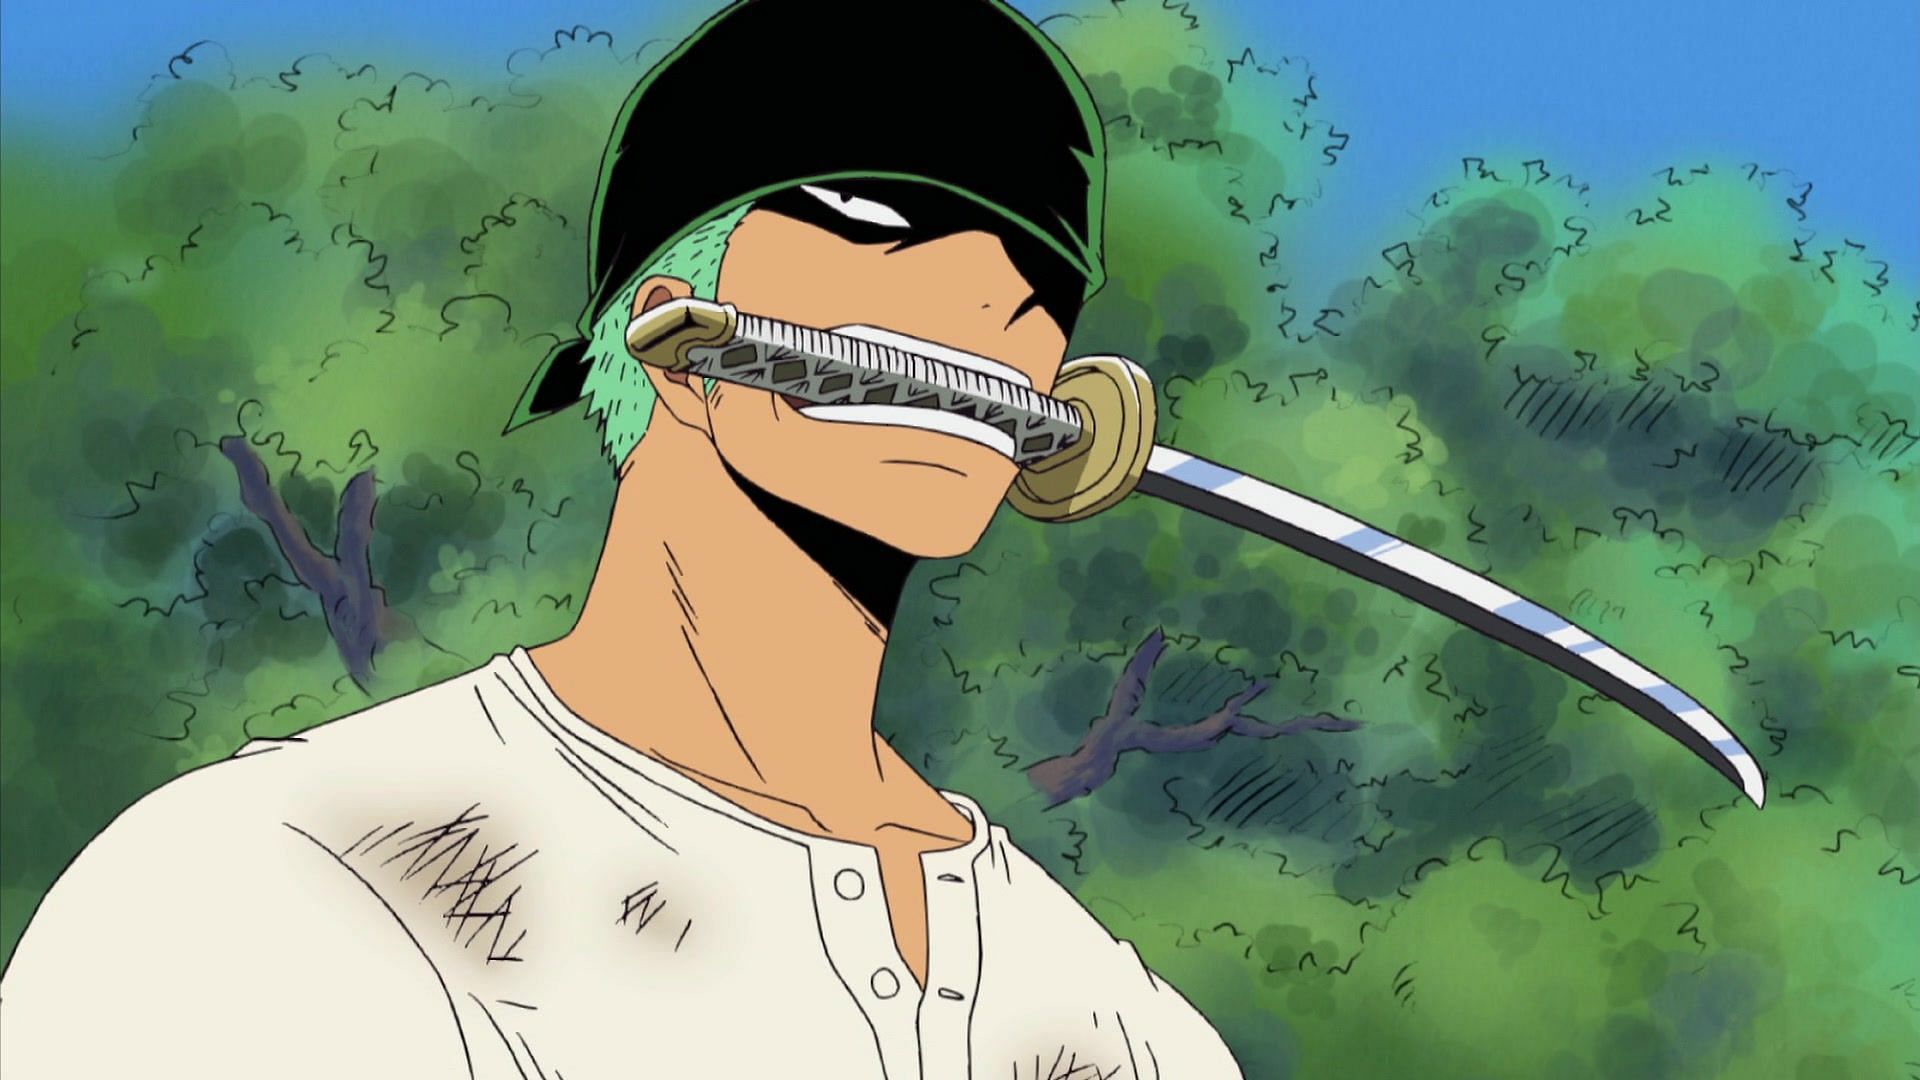 Jokes aside how far would zoro go if he were to fight all 13 captains  Assuming its one v one  rbleach